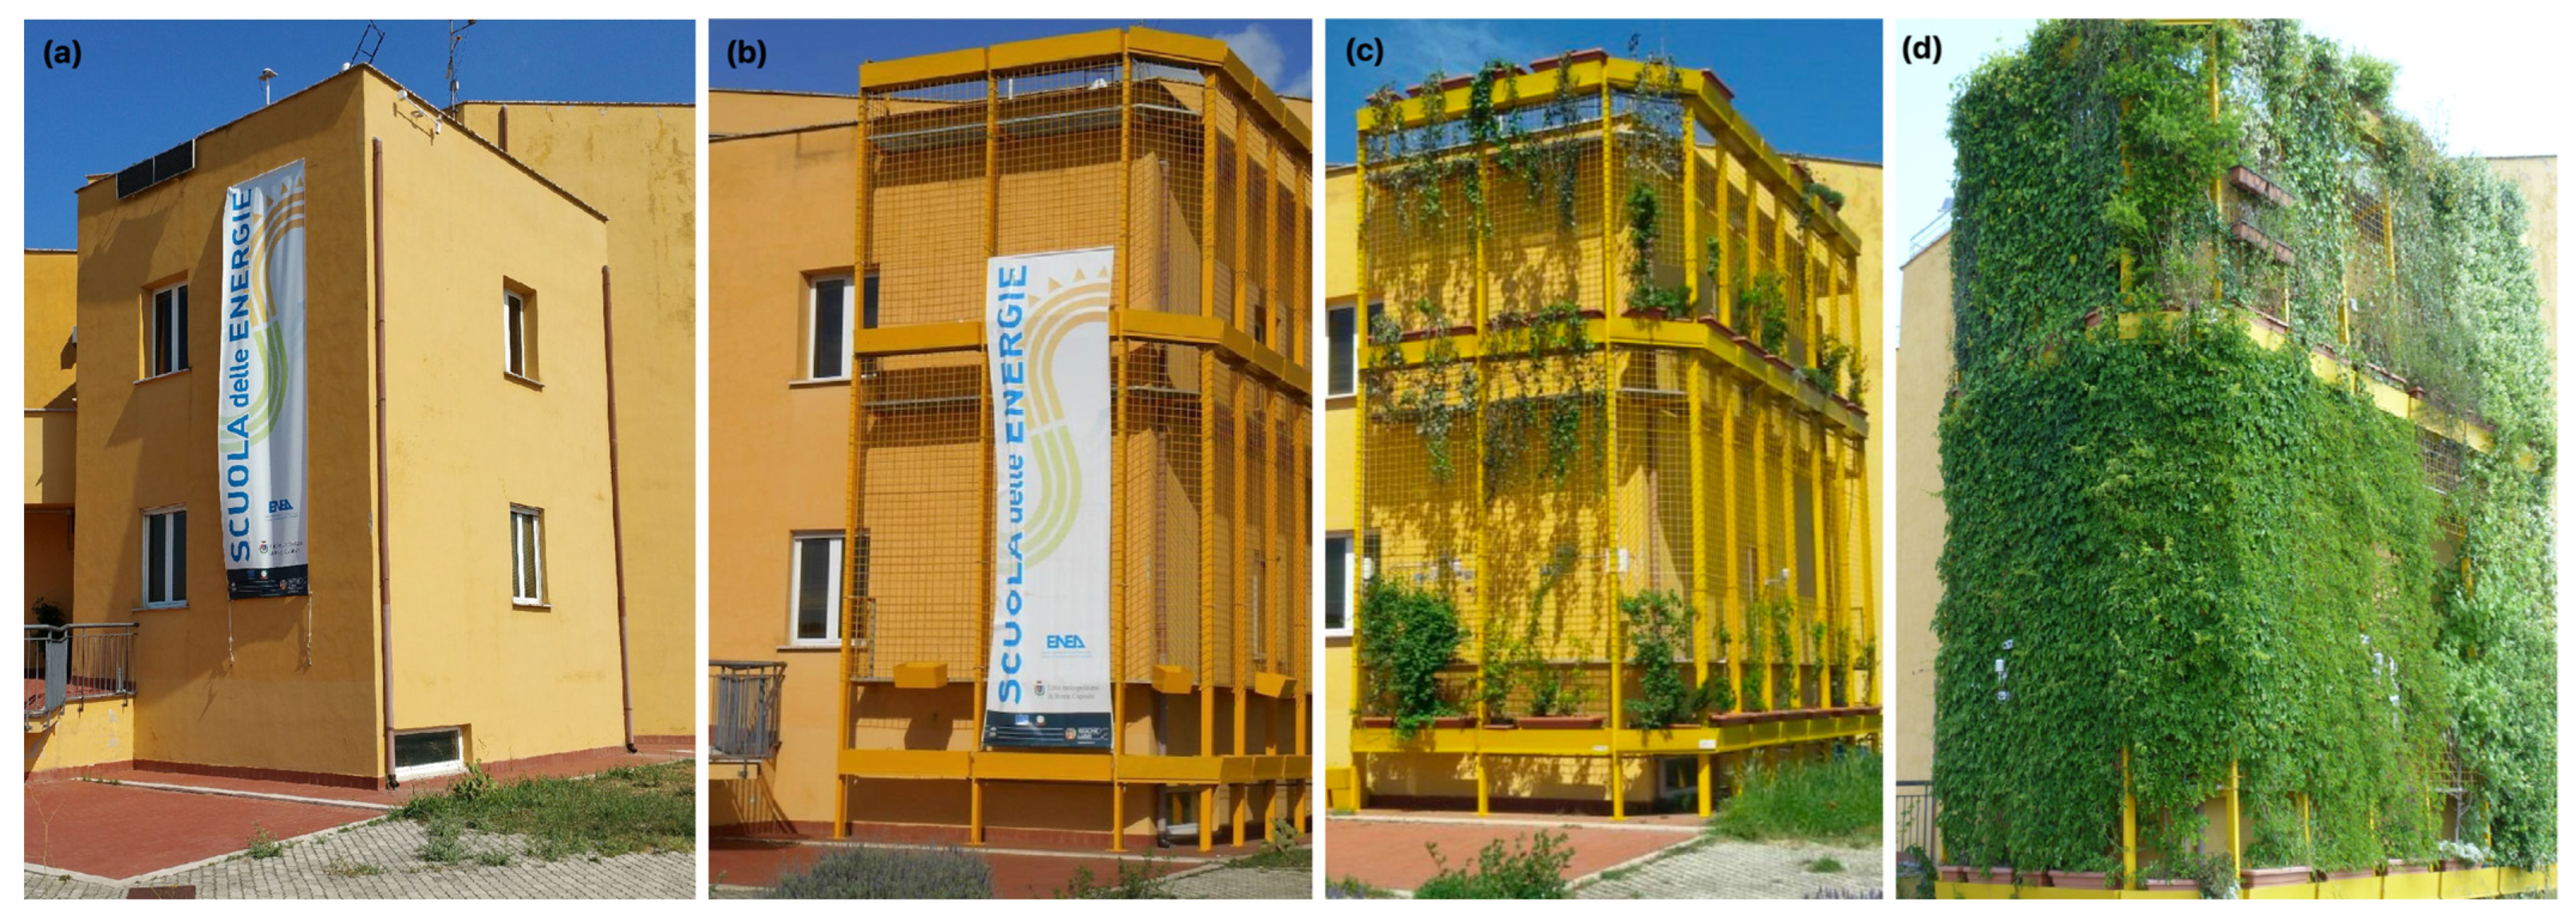 Horticulturae | Free Full-Text | Vertical Greenery as Natural Tool for  Improving Energy Efficiency of Buildings